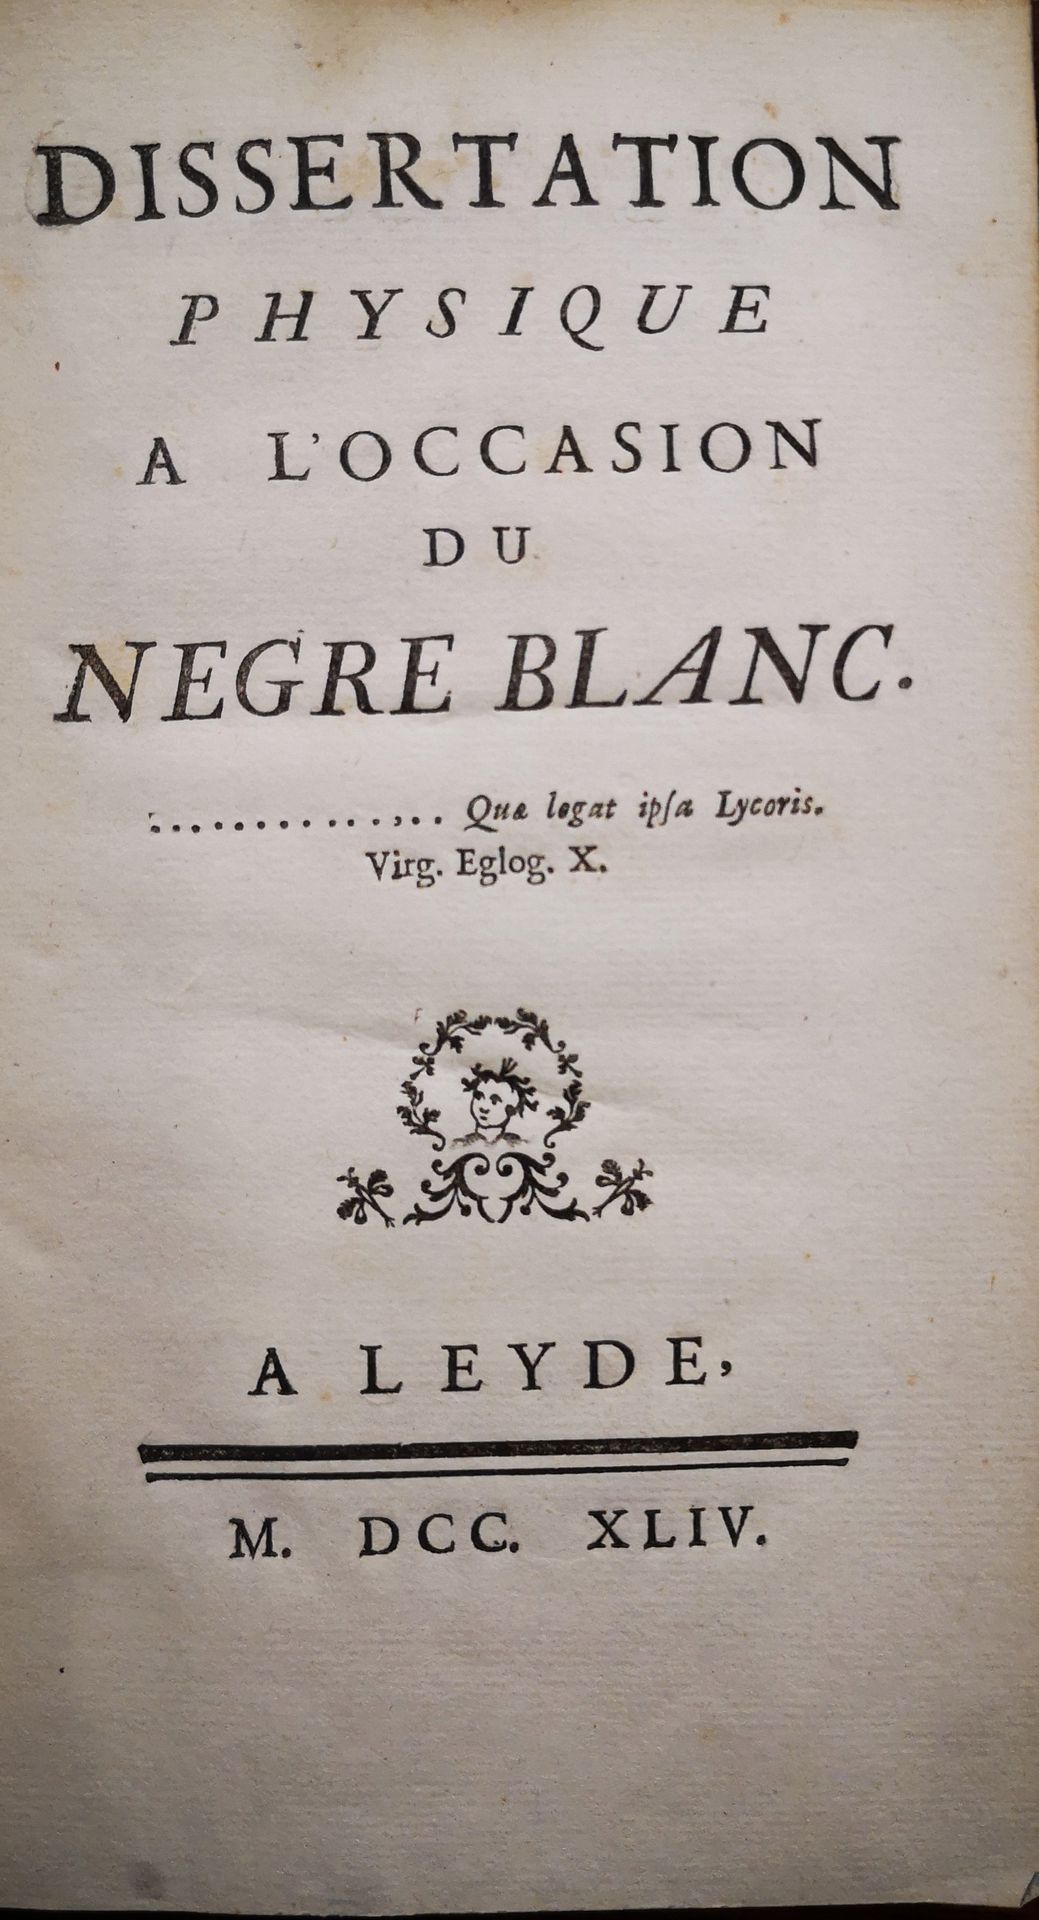 Null MAUPERTUIS]. Physical dissertation on the occasion of the white negro. Leid&hellip;